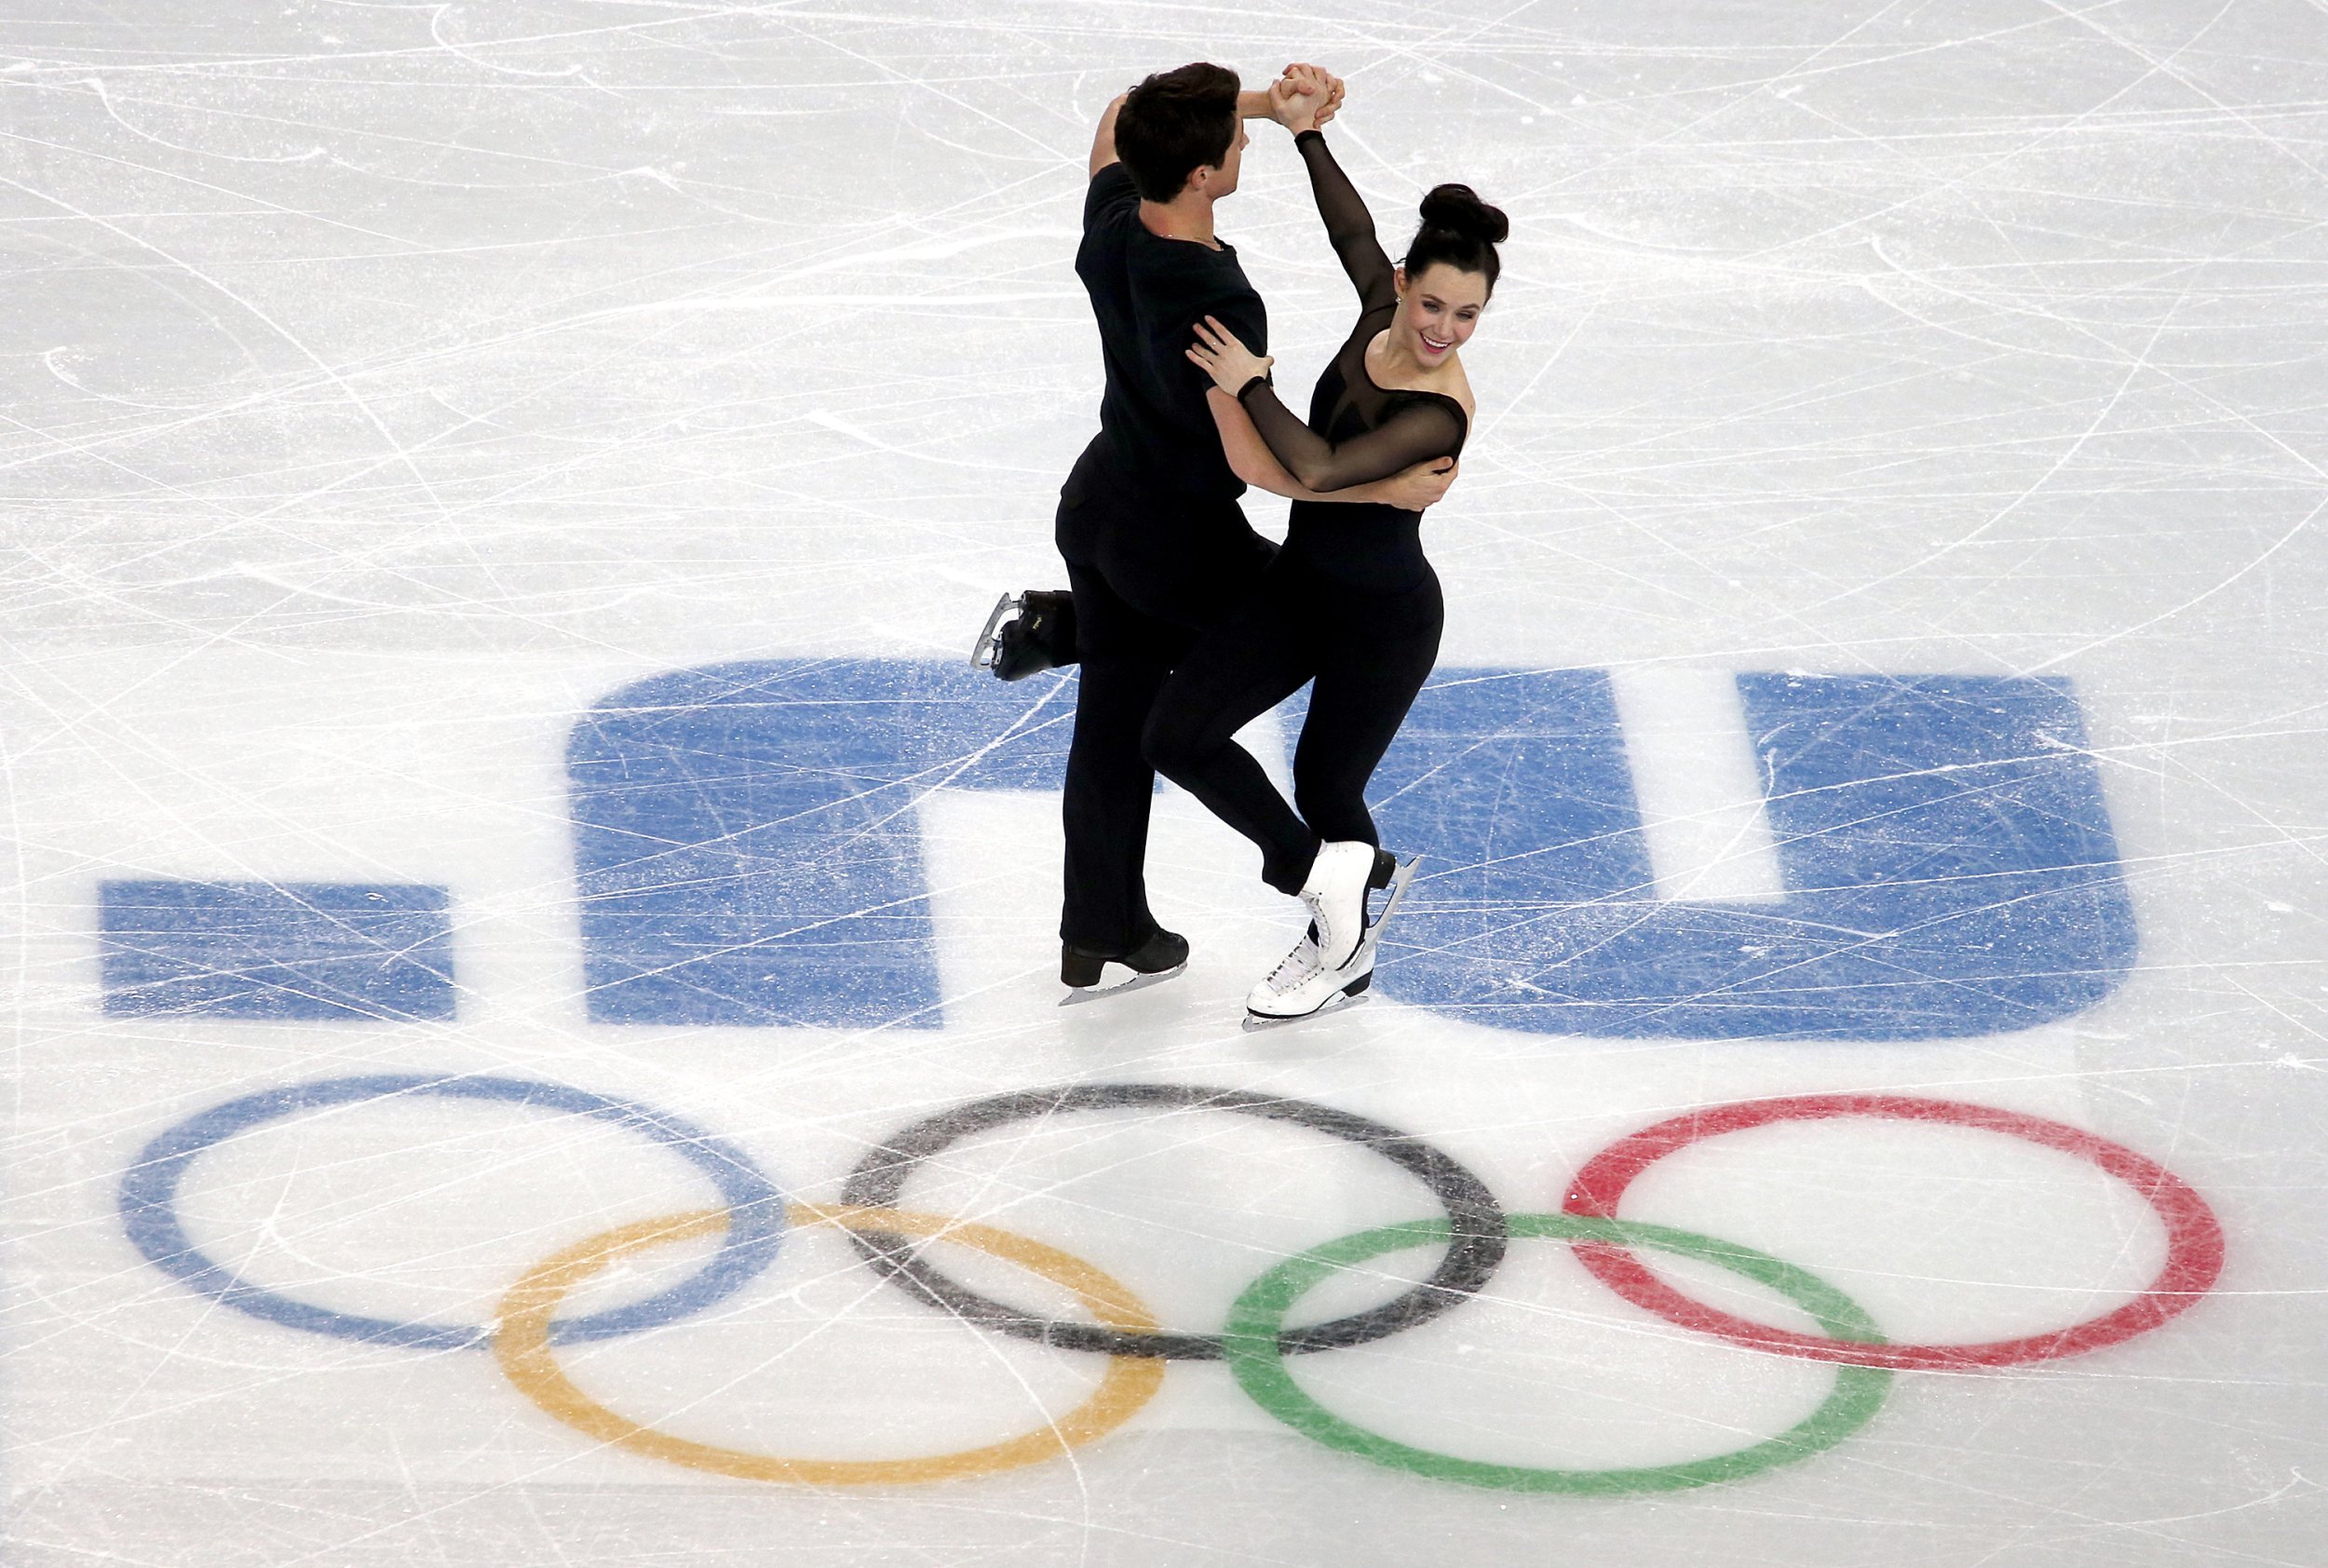 2014 Sochi Winter Olympics Top 5 Pairs Figure Skating Routines of All Time